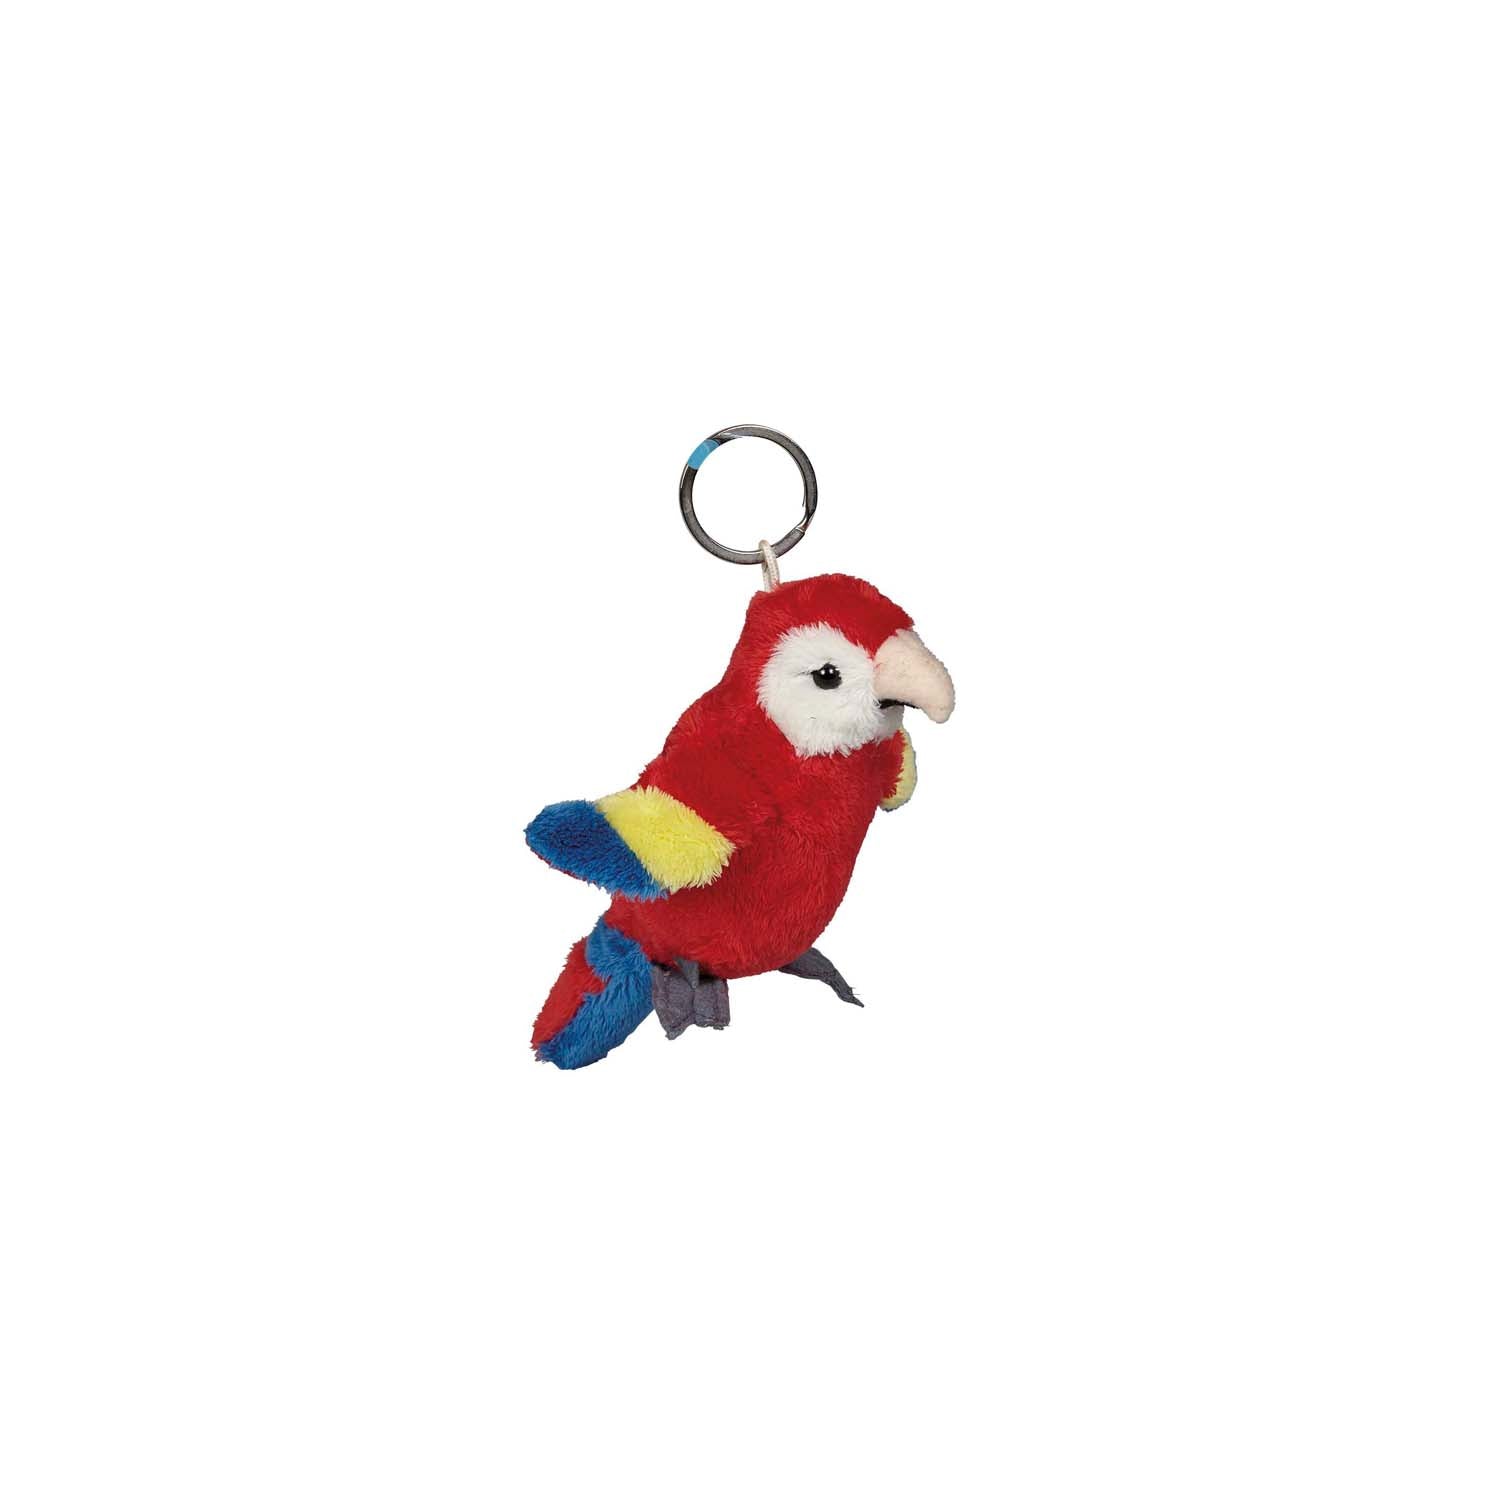 MACAW SOFT KEYRING, LARGE - Gifts For Wild Life Lovers